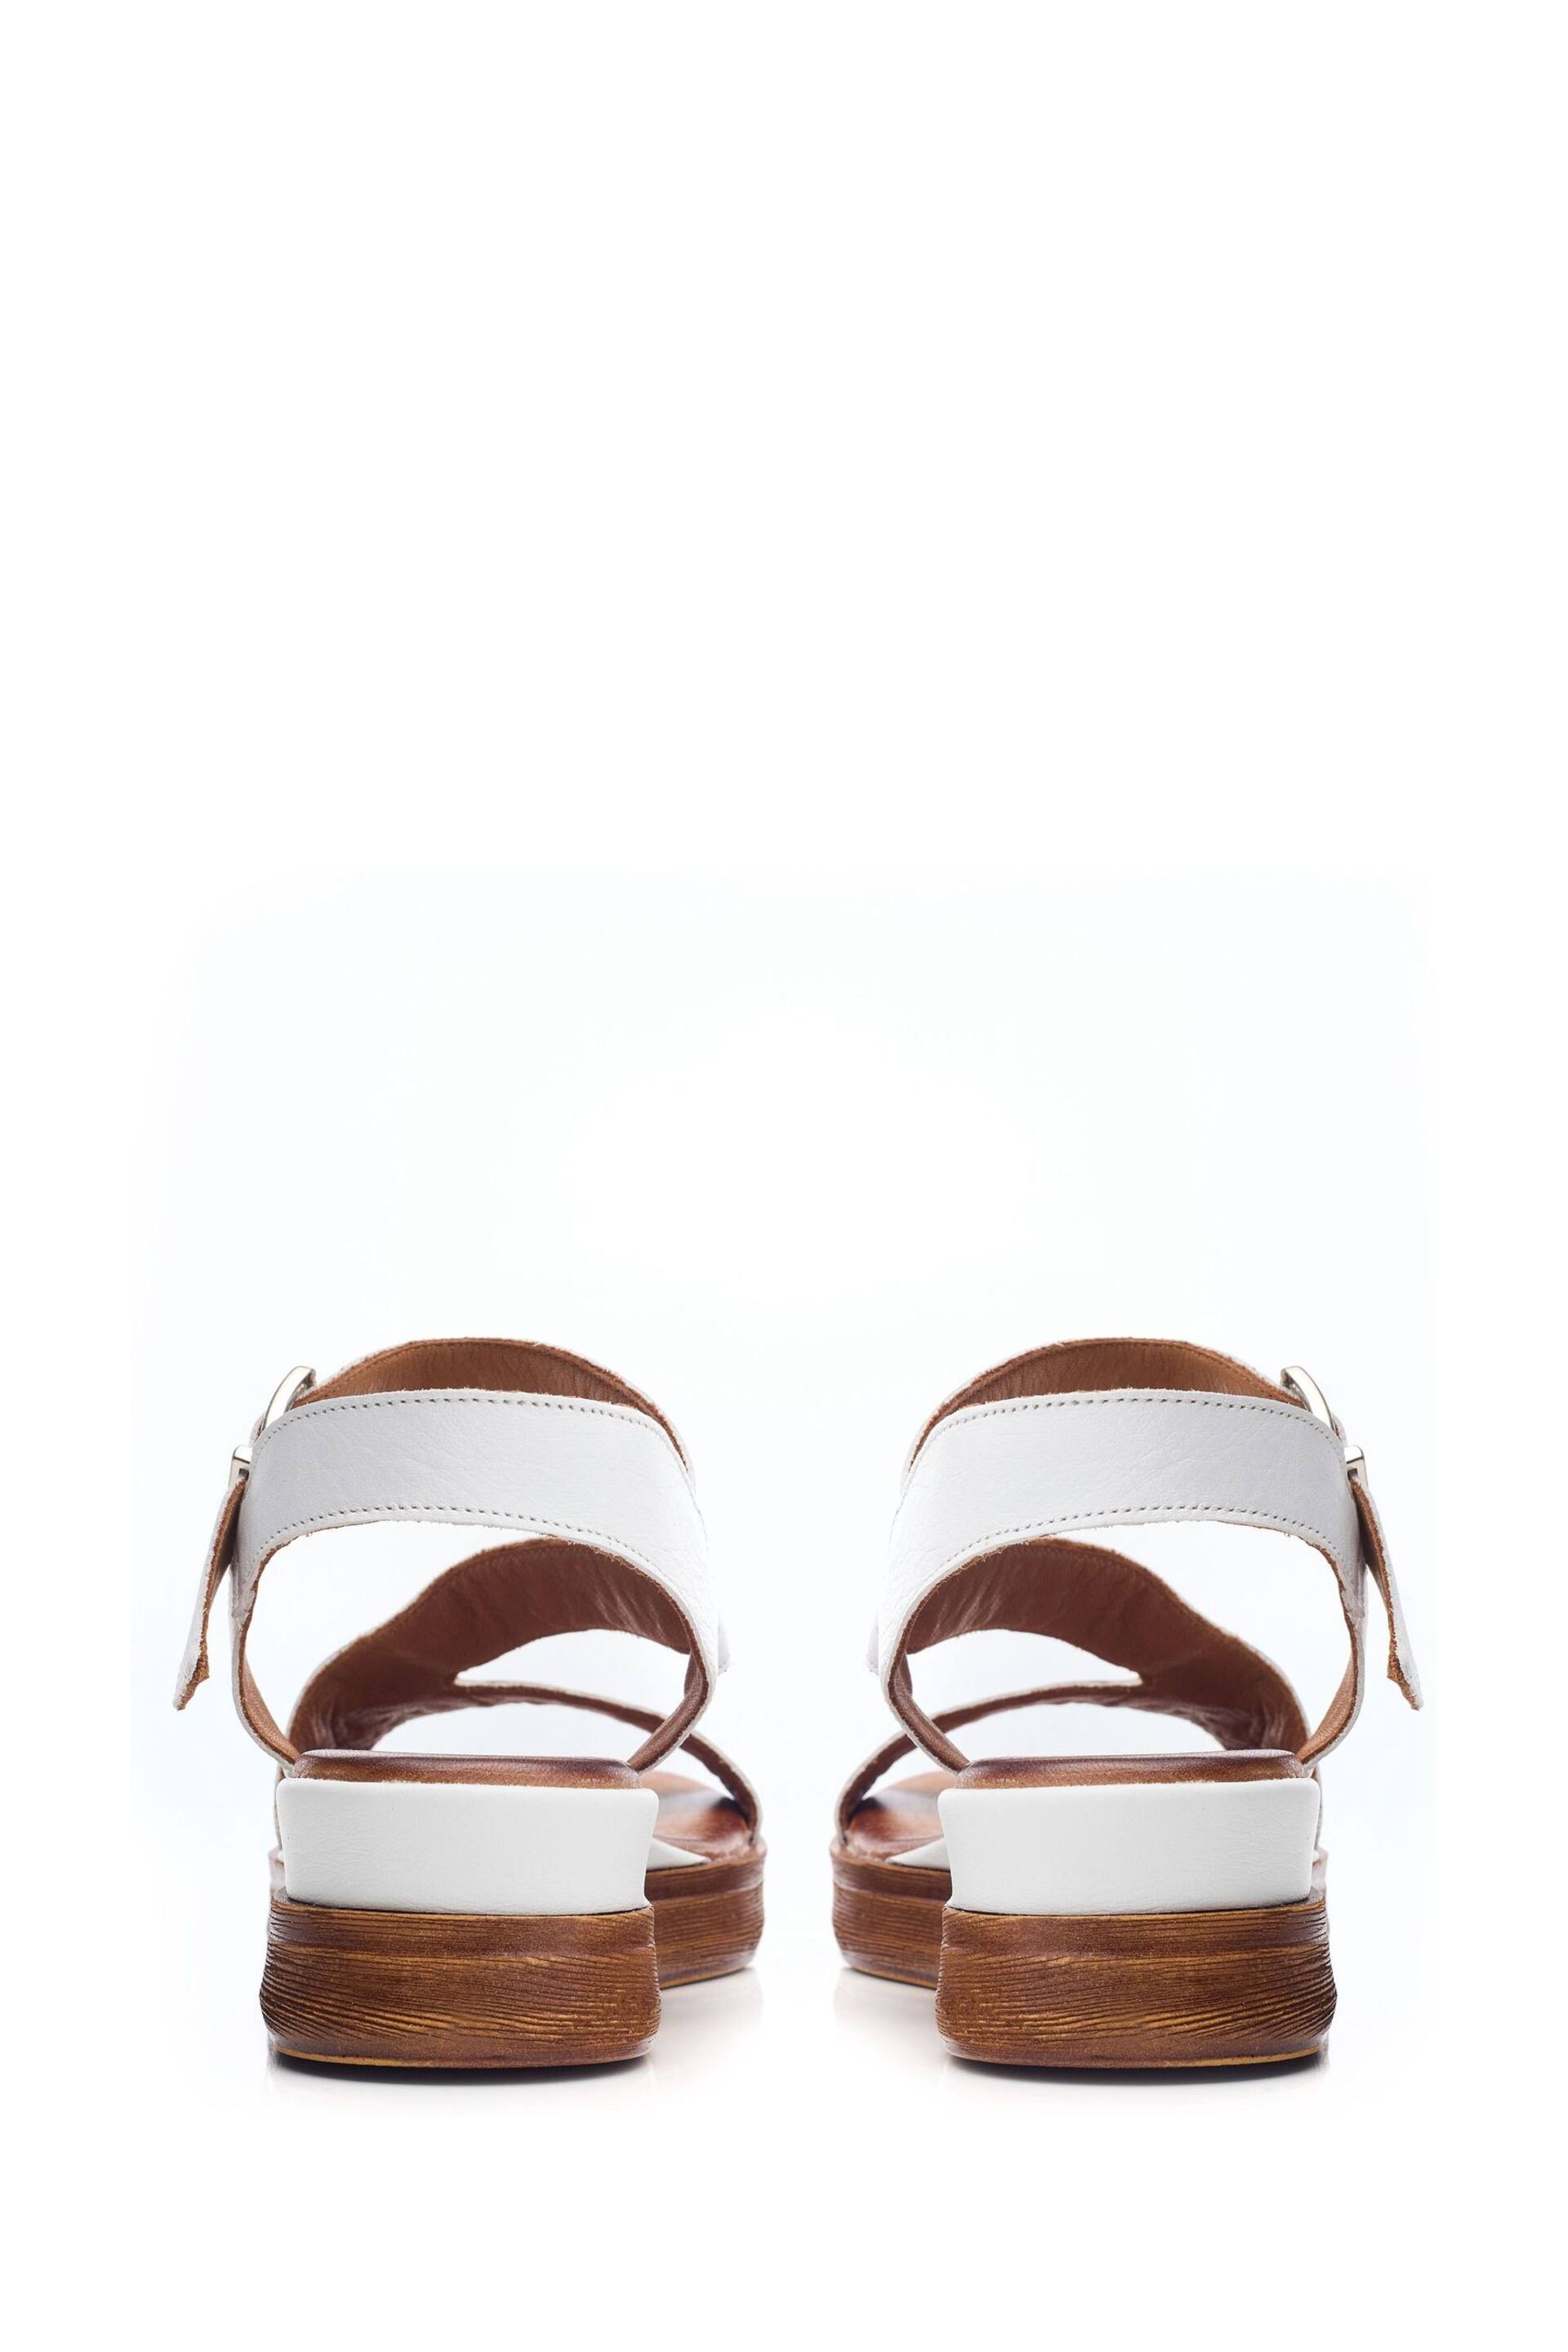 Moda in Pelle Palmers Asymetric Low Wedges - Image 3 of 4